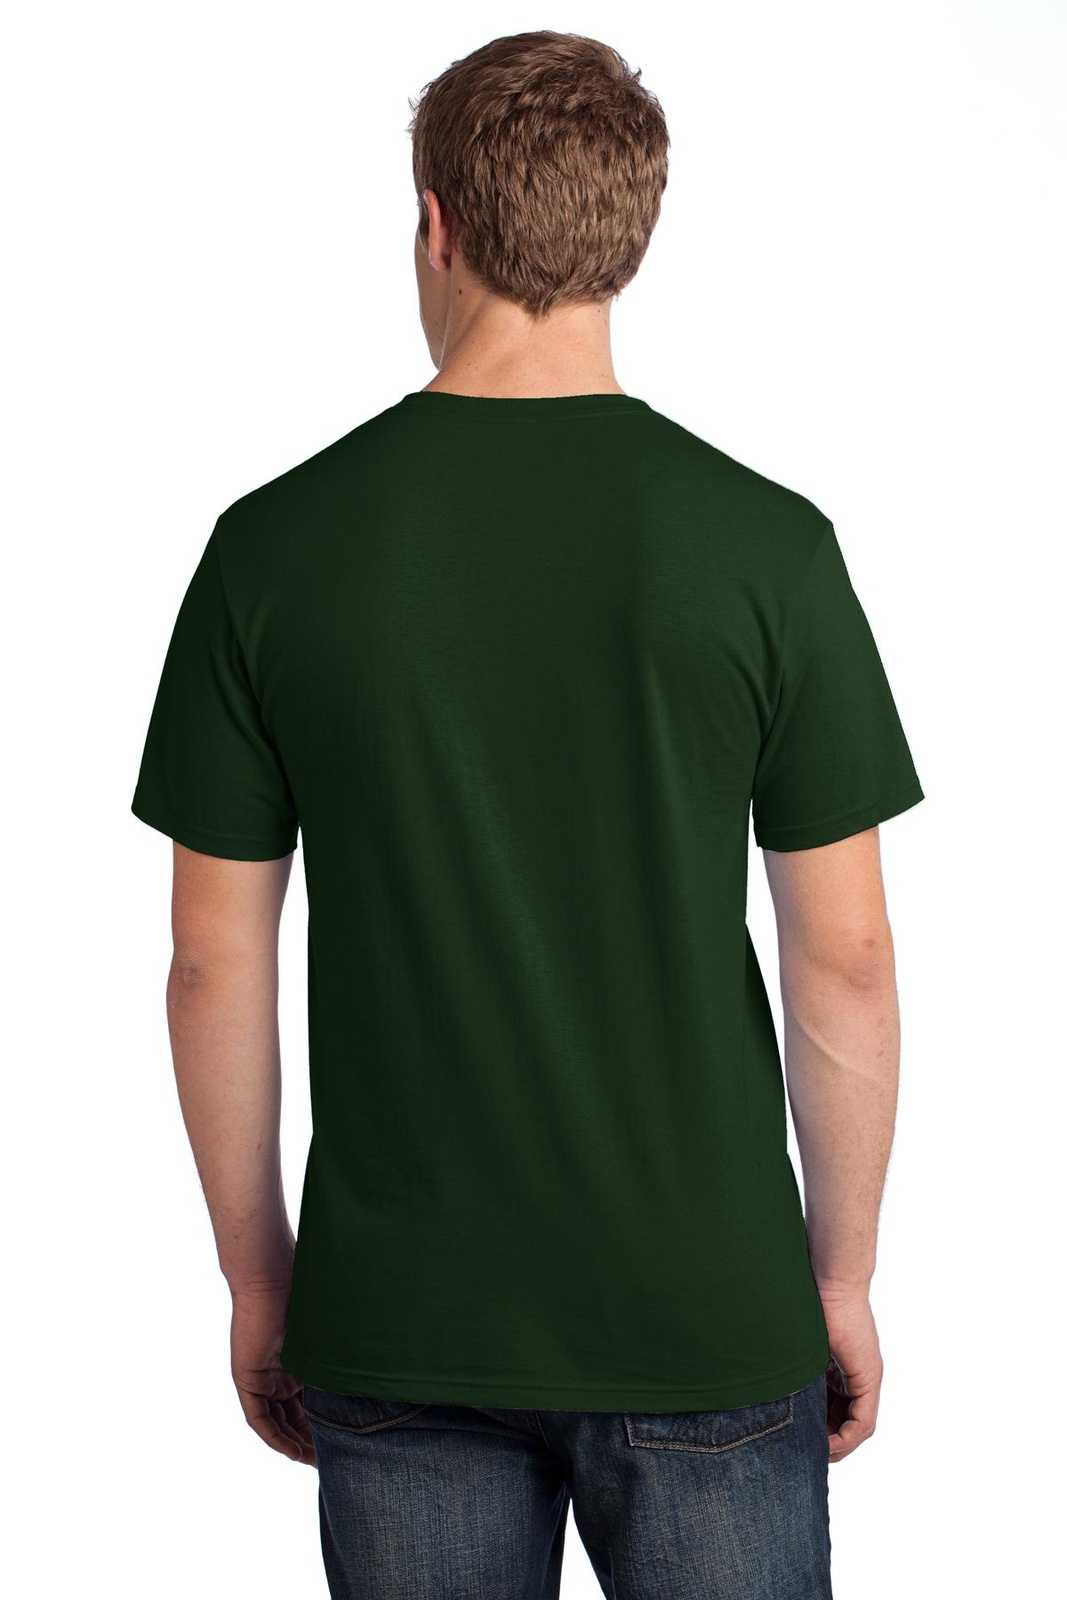 Fruit of the Loom 3930 HD Cotton 100% Cotton T-Shirt - Forest Green - HIT a Double